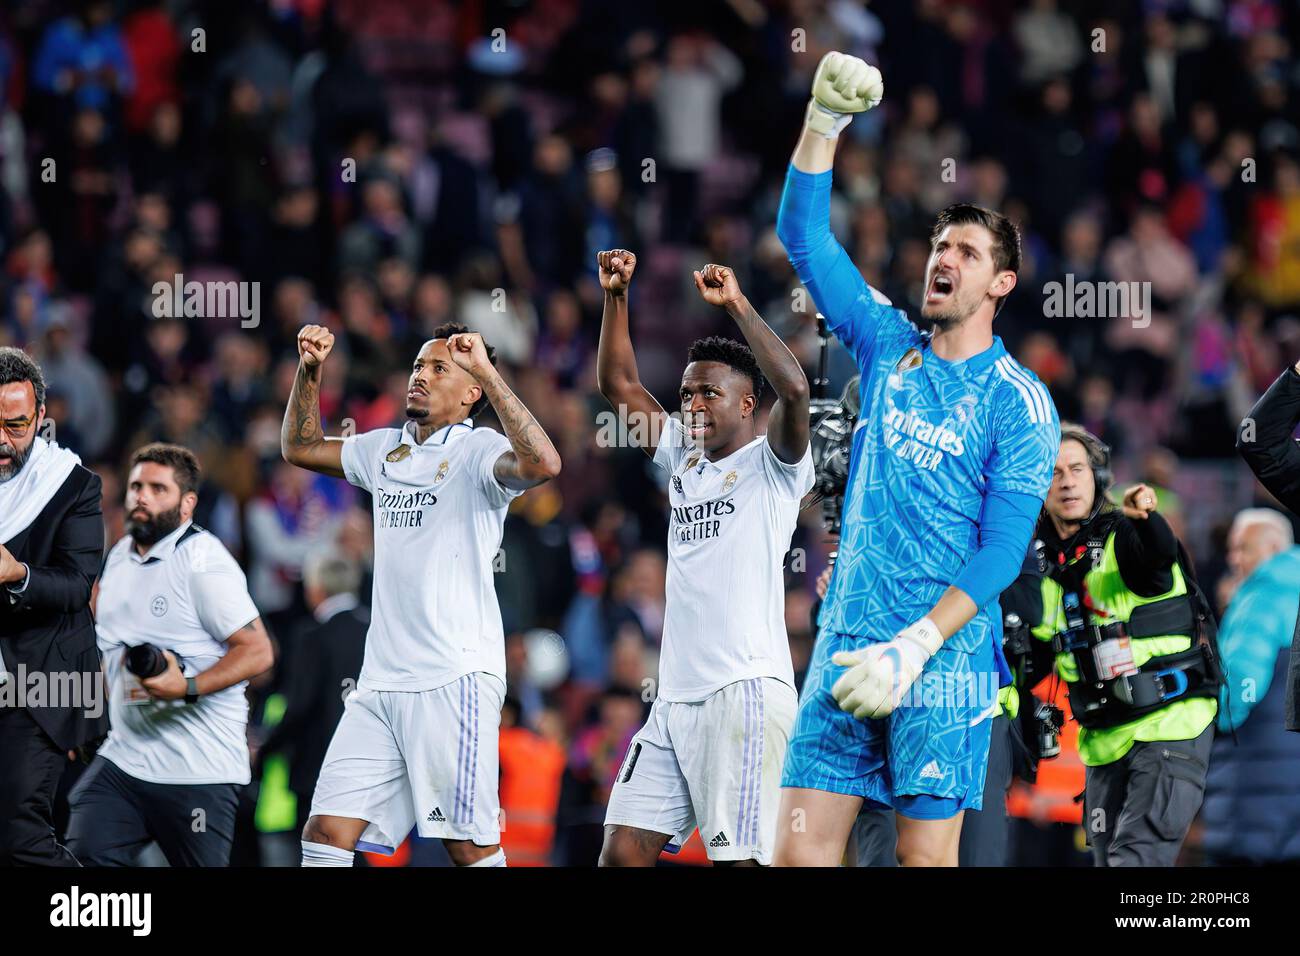 BARCELONA - APR 5: Courtois celebrates the victory during the Copa del Rey match between FC Barcelona and Real Madrid at the Spotify Camp Nou Stadium Stock Photo